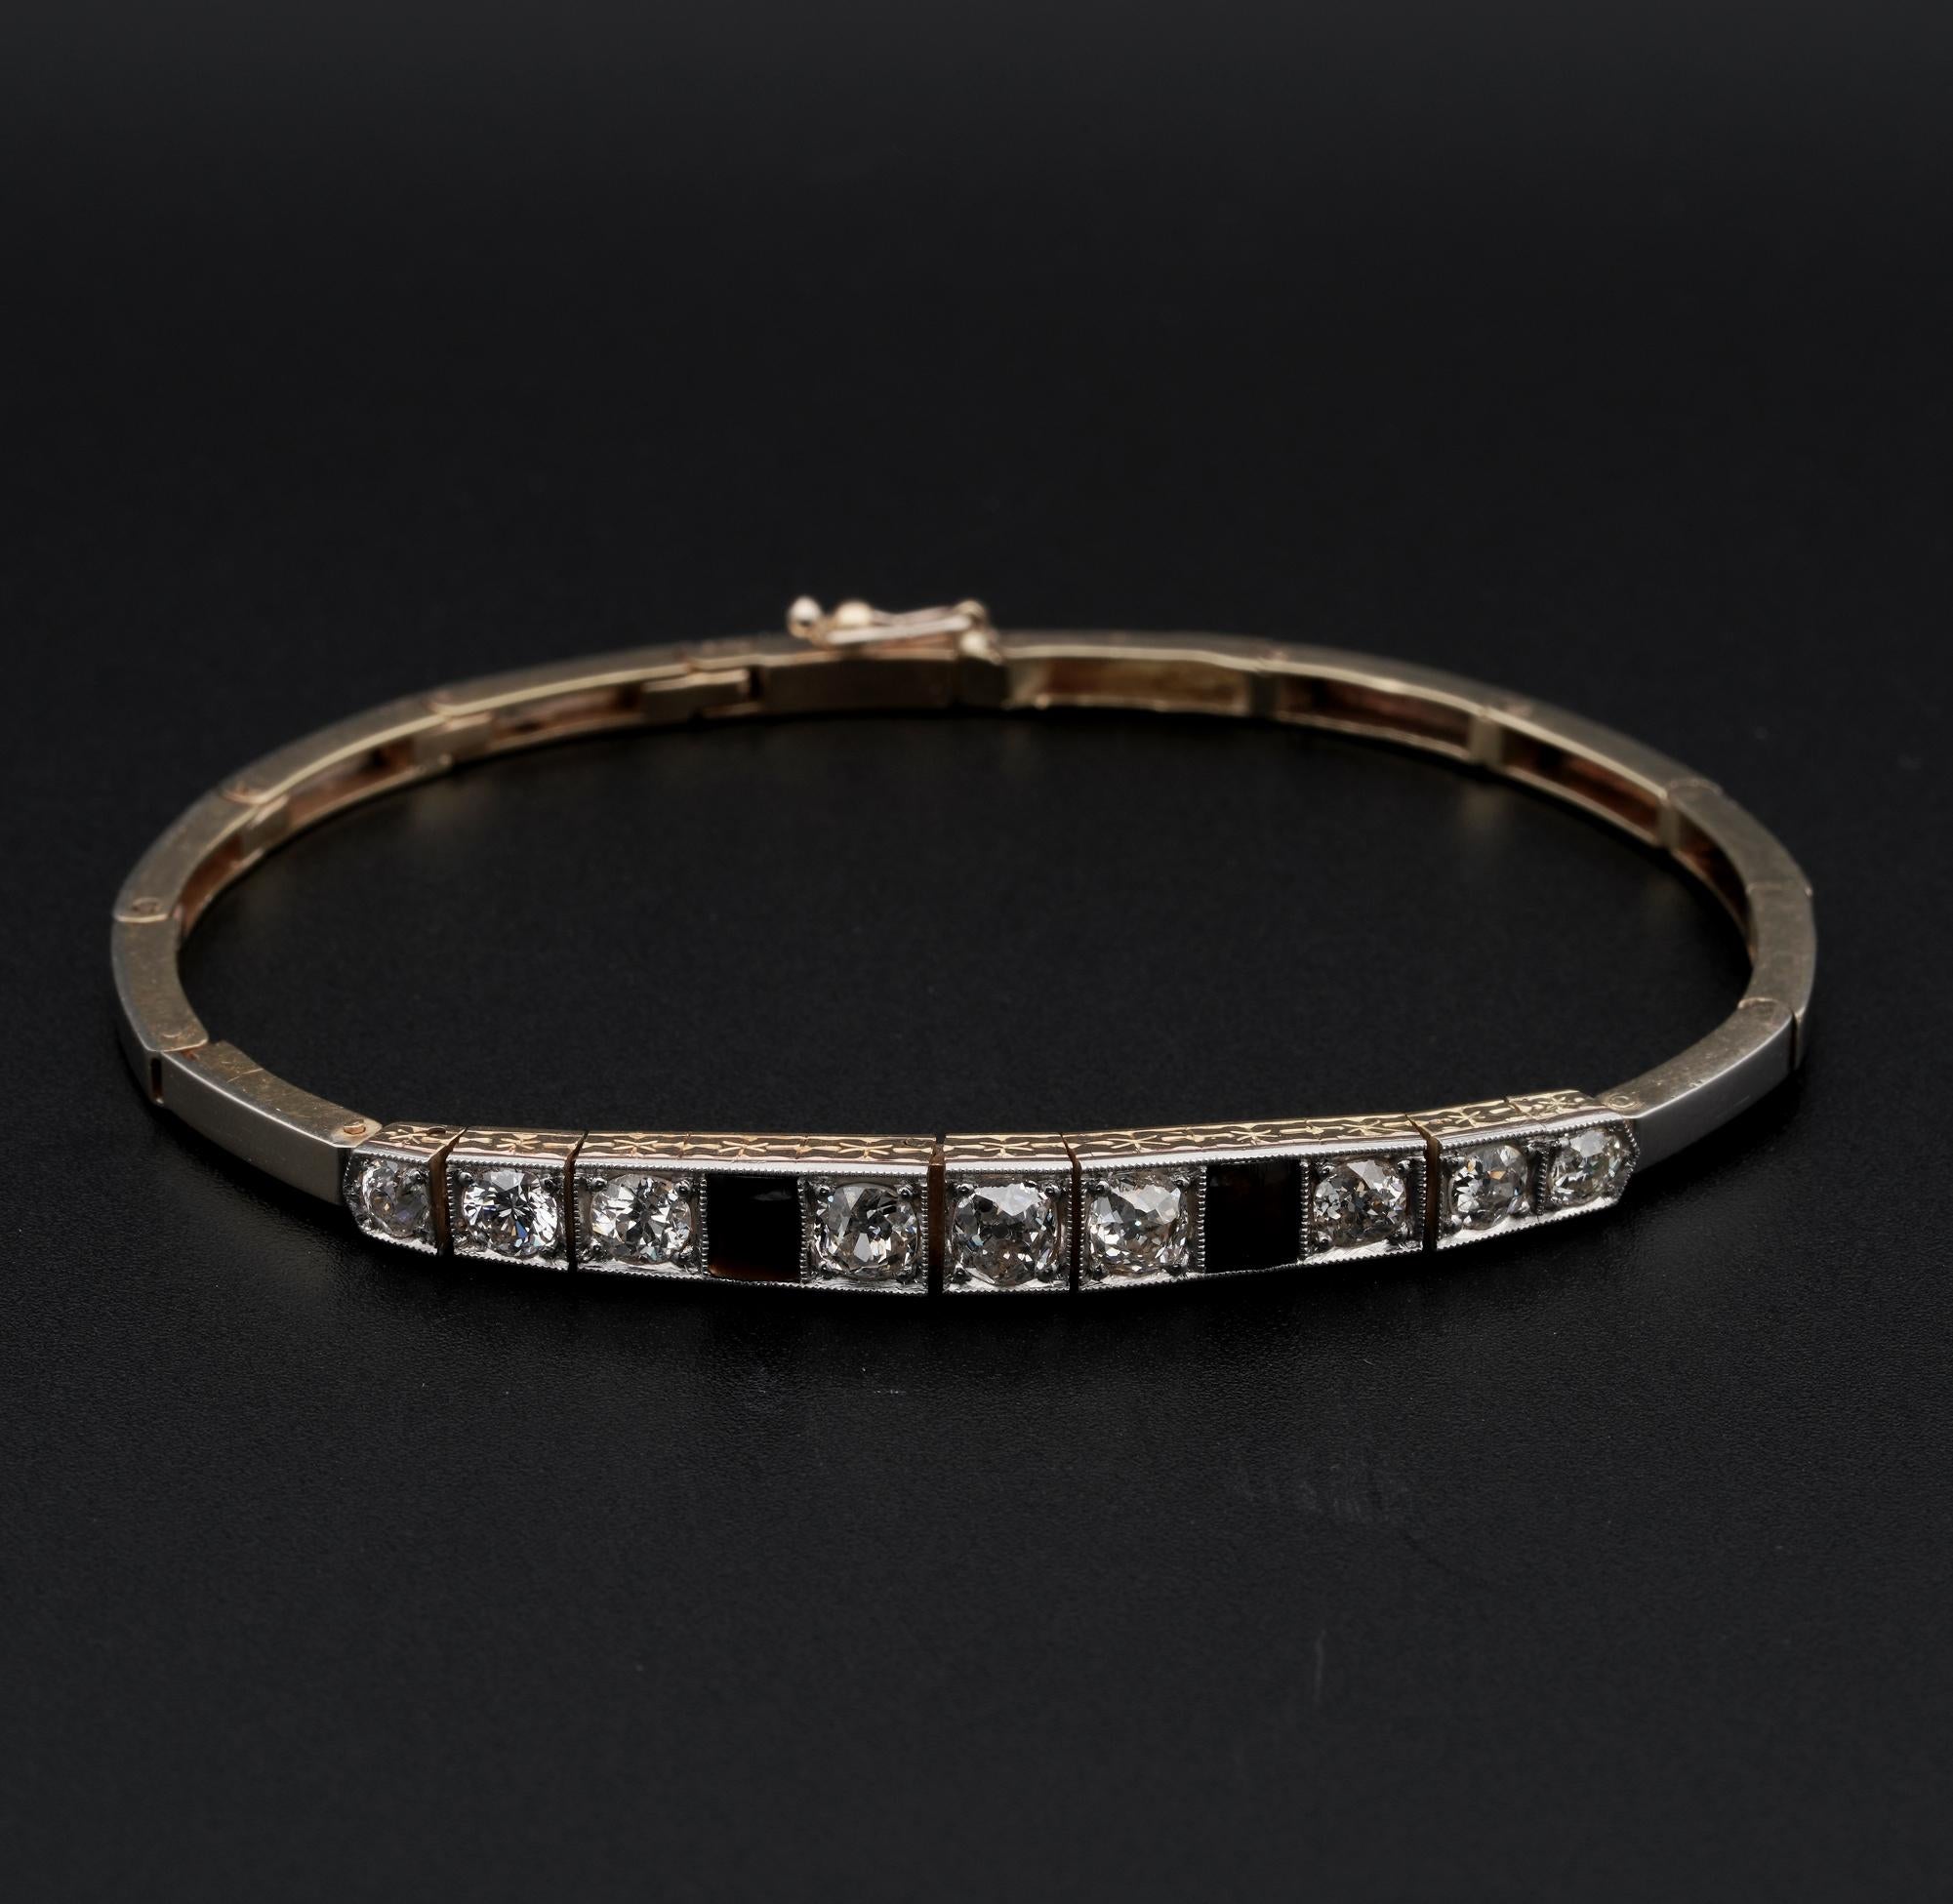 Edwardian Treasure

This beautiful, classy Edwardian era bracelet is 1905 ca
Hand crafted of solid 18 Kt gold topped by Platinum, marvellous carving details on sides and gorgeous bar links leading to the centre sparkly line of Diamonds alternated by